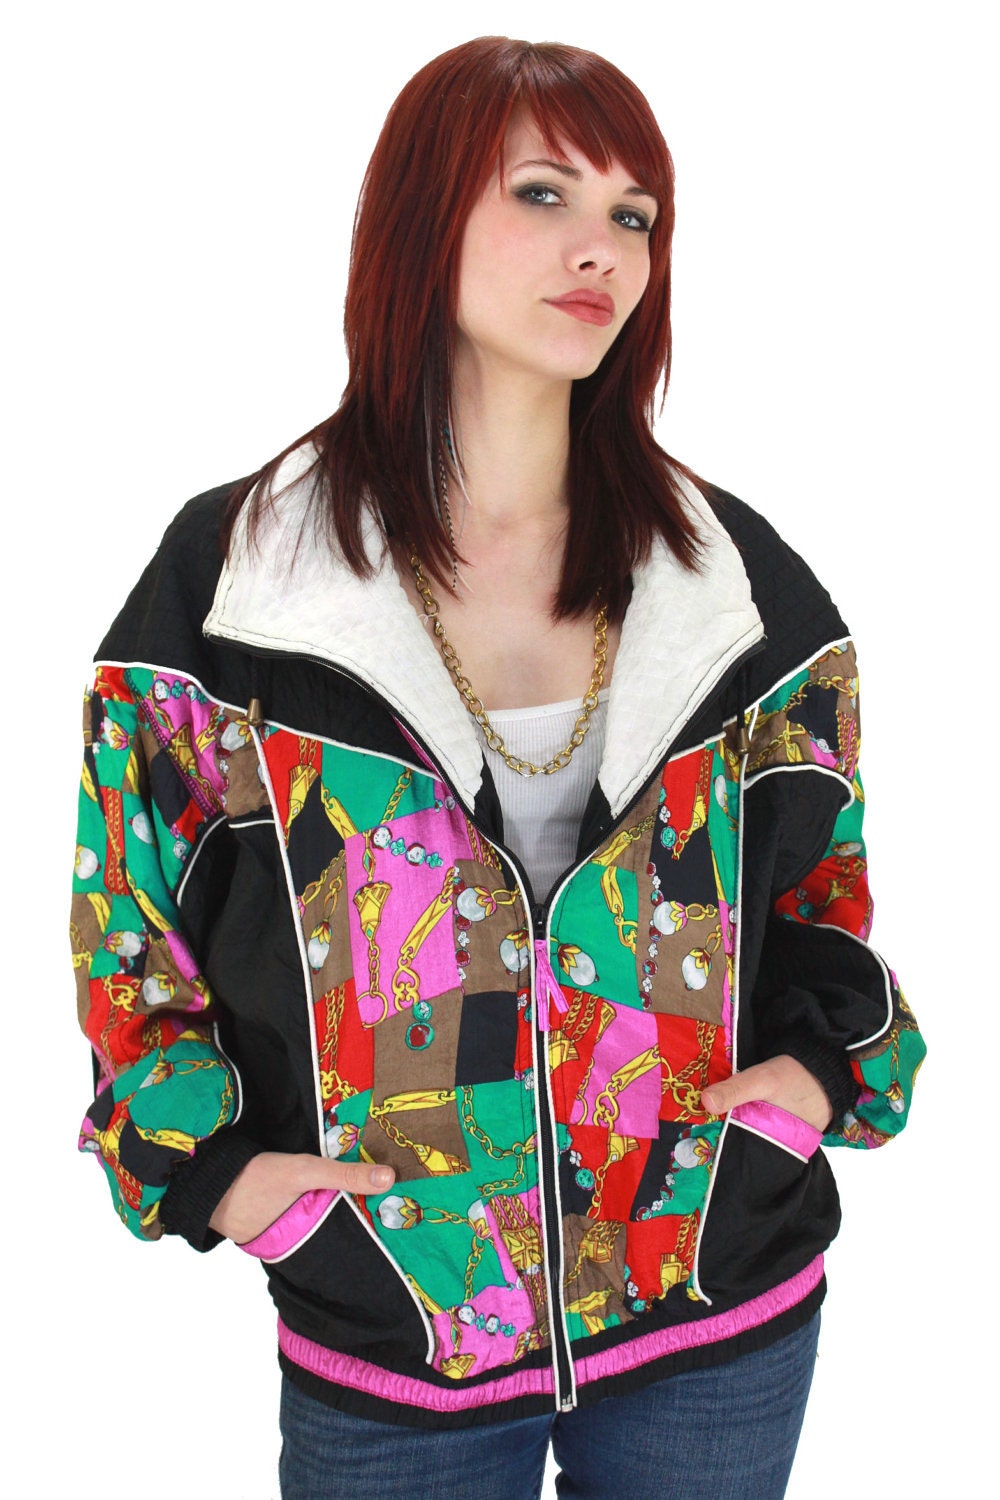 90s Neon Windbreaker Gold Chain Jacket Hip Hop 1990s Vintage Quilted Details Pucci Scarf Chain Print L XL Large XLarge